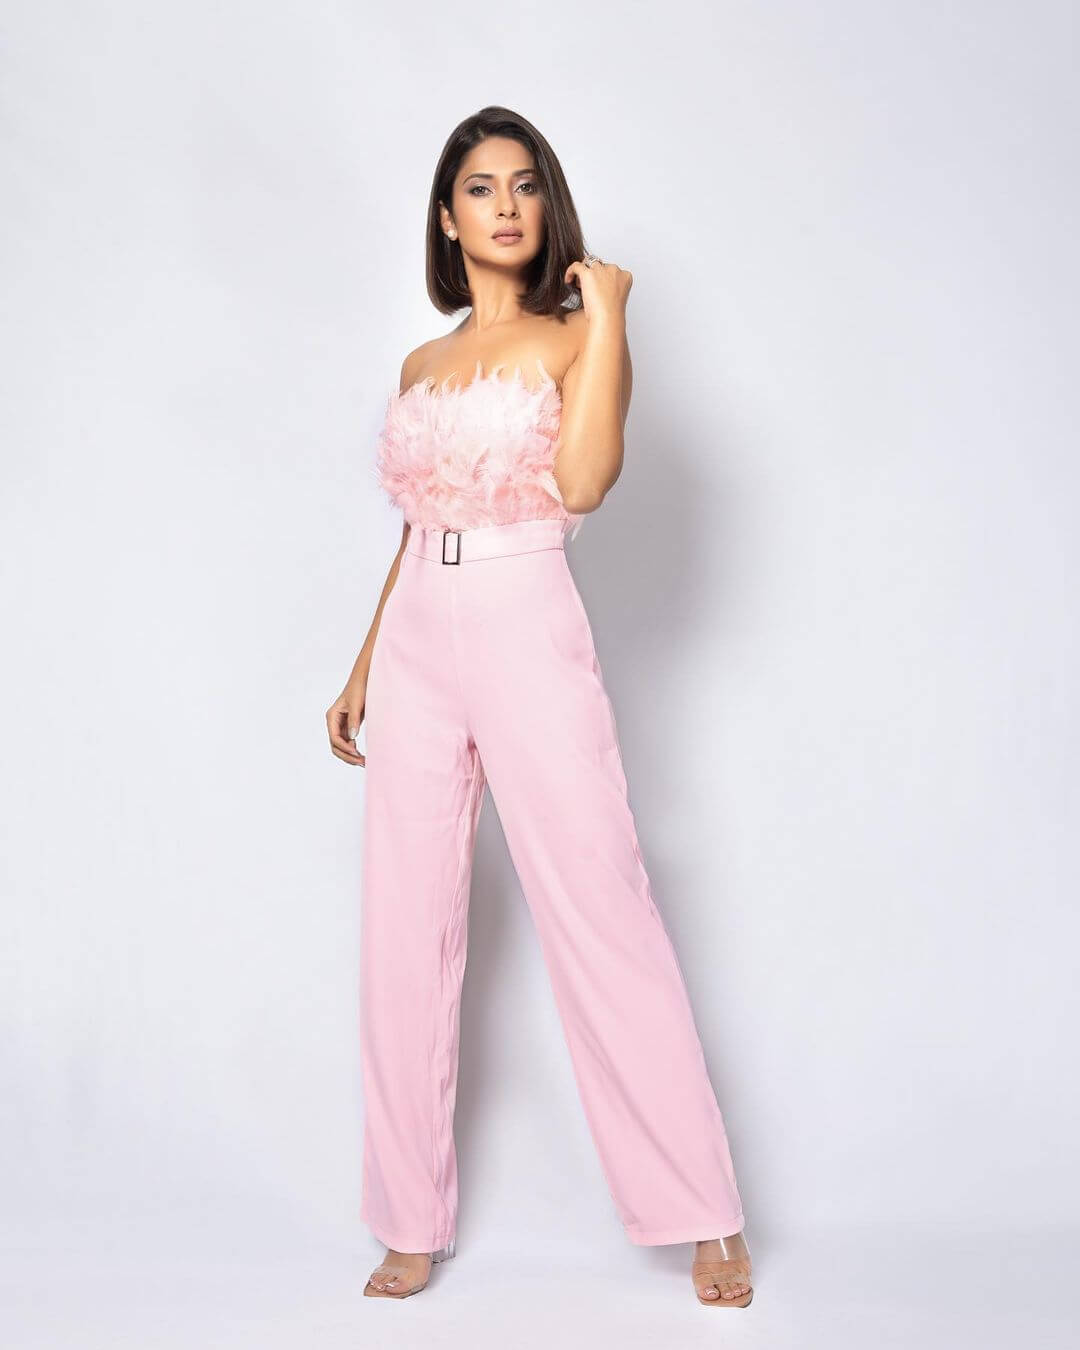 Jennifer Winget Look Extremely Gorgeous In Off Shoulder Feather Corset With Pink Pants